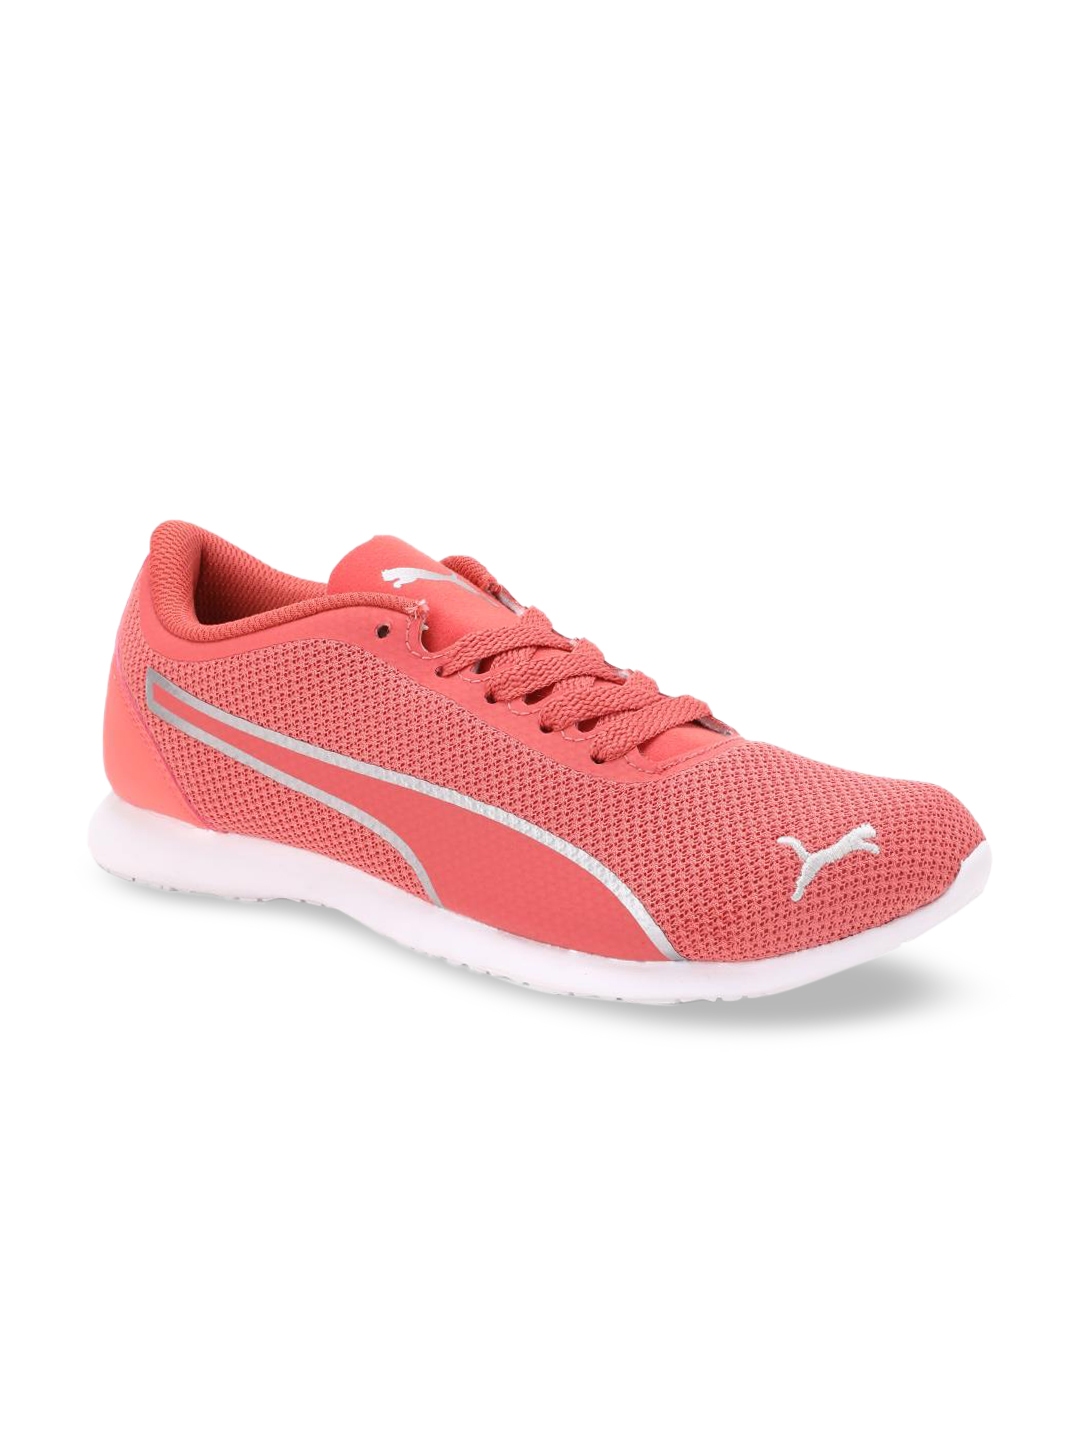 Buy Puma Women Coral Pink Sneakers - Casual Shoes for Women 10018087 ...